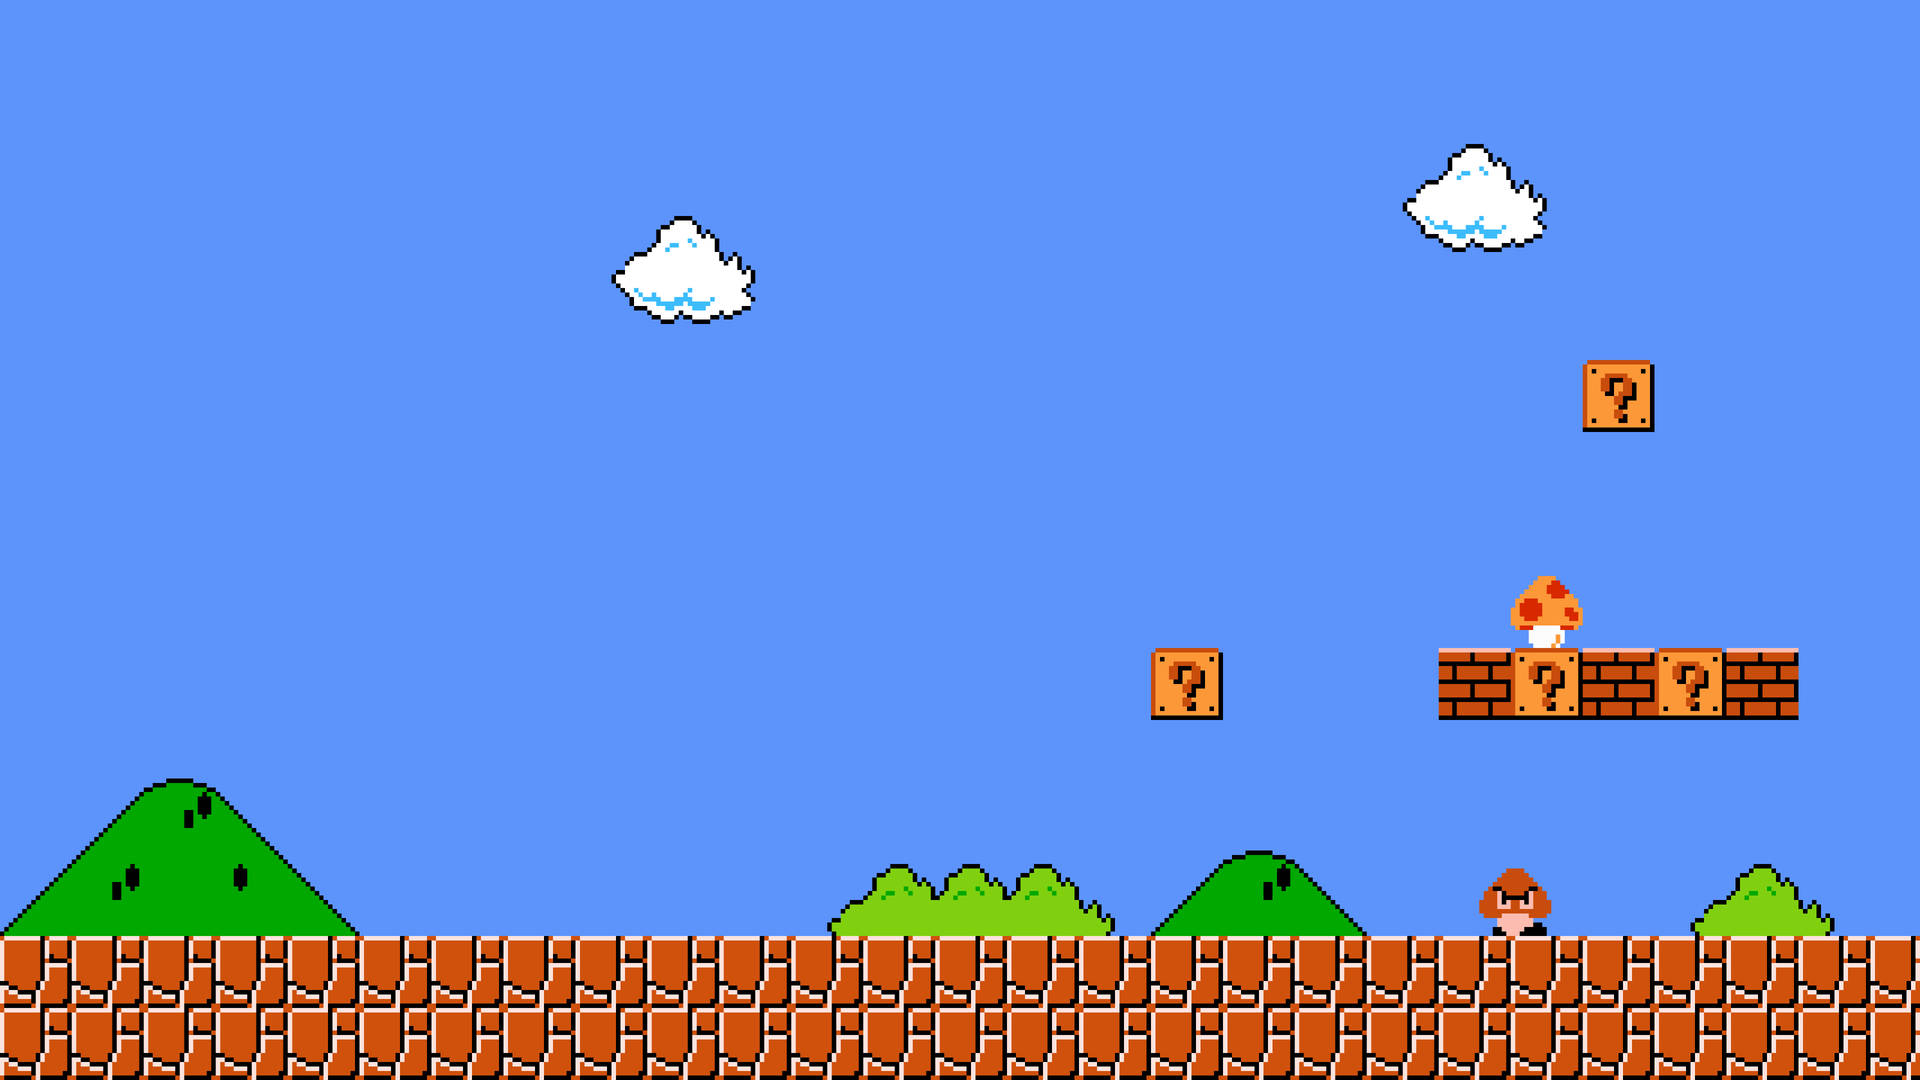 A Nintendo Mario Game With A Character On Top Of A Brick Background